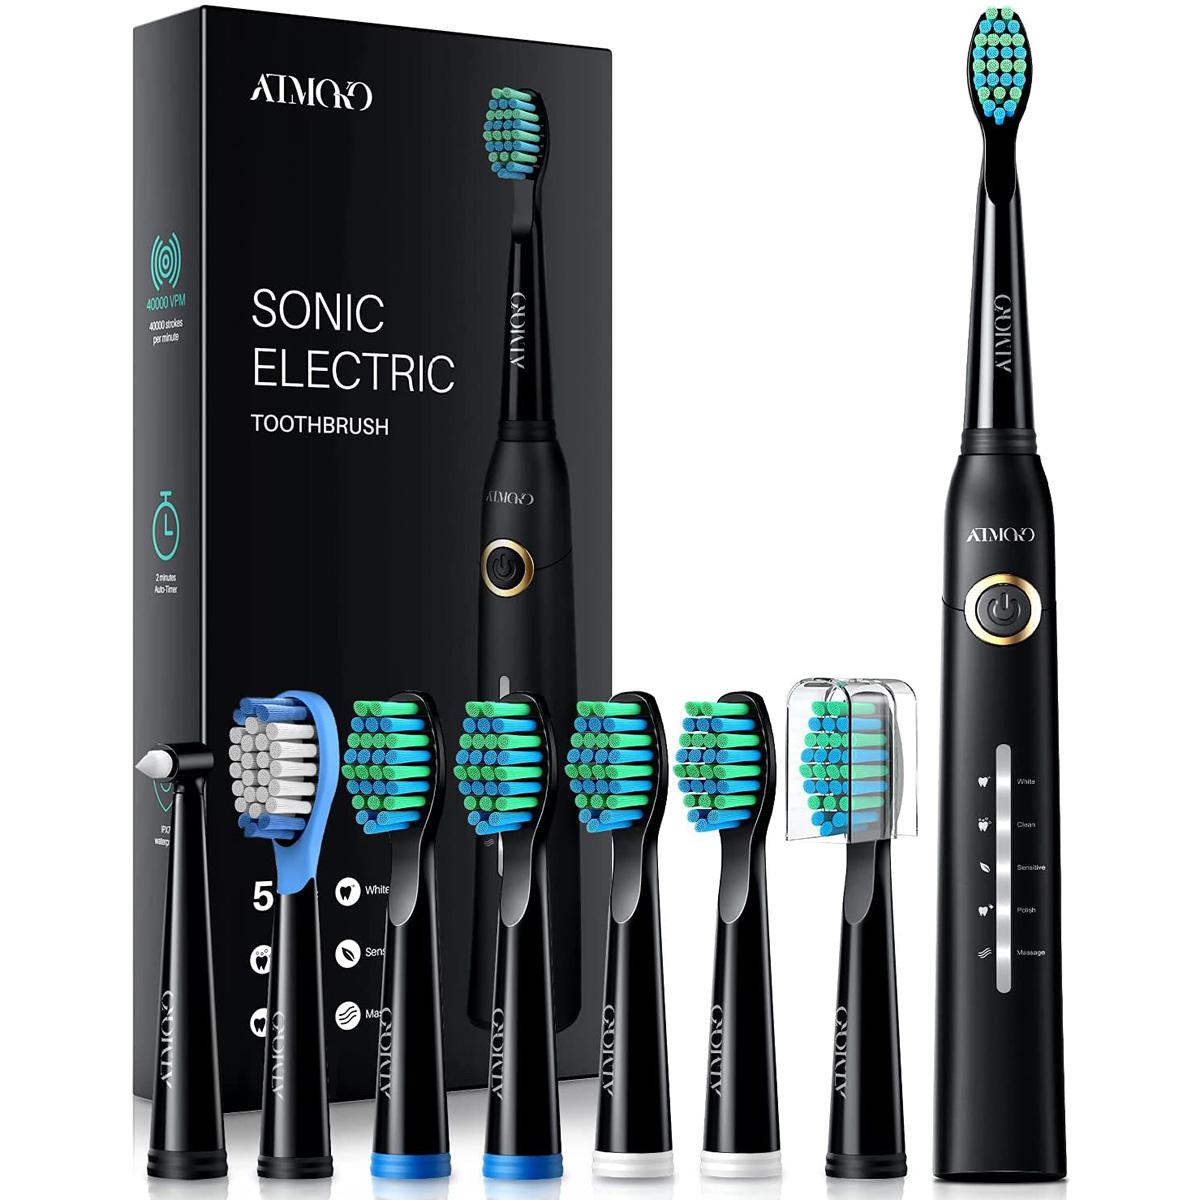 Atmoko Electric Toothbrush with 8 Duponts Brush Heads for $13.99